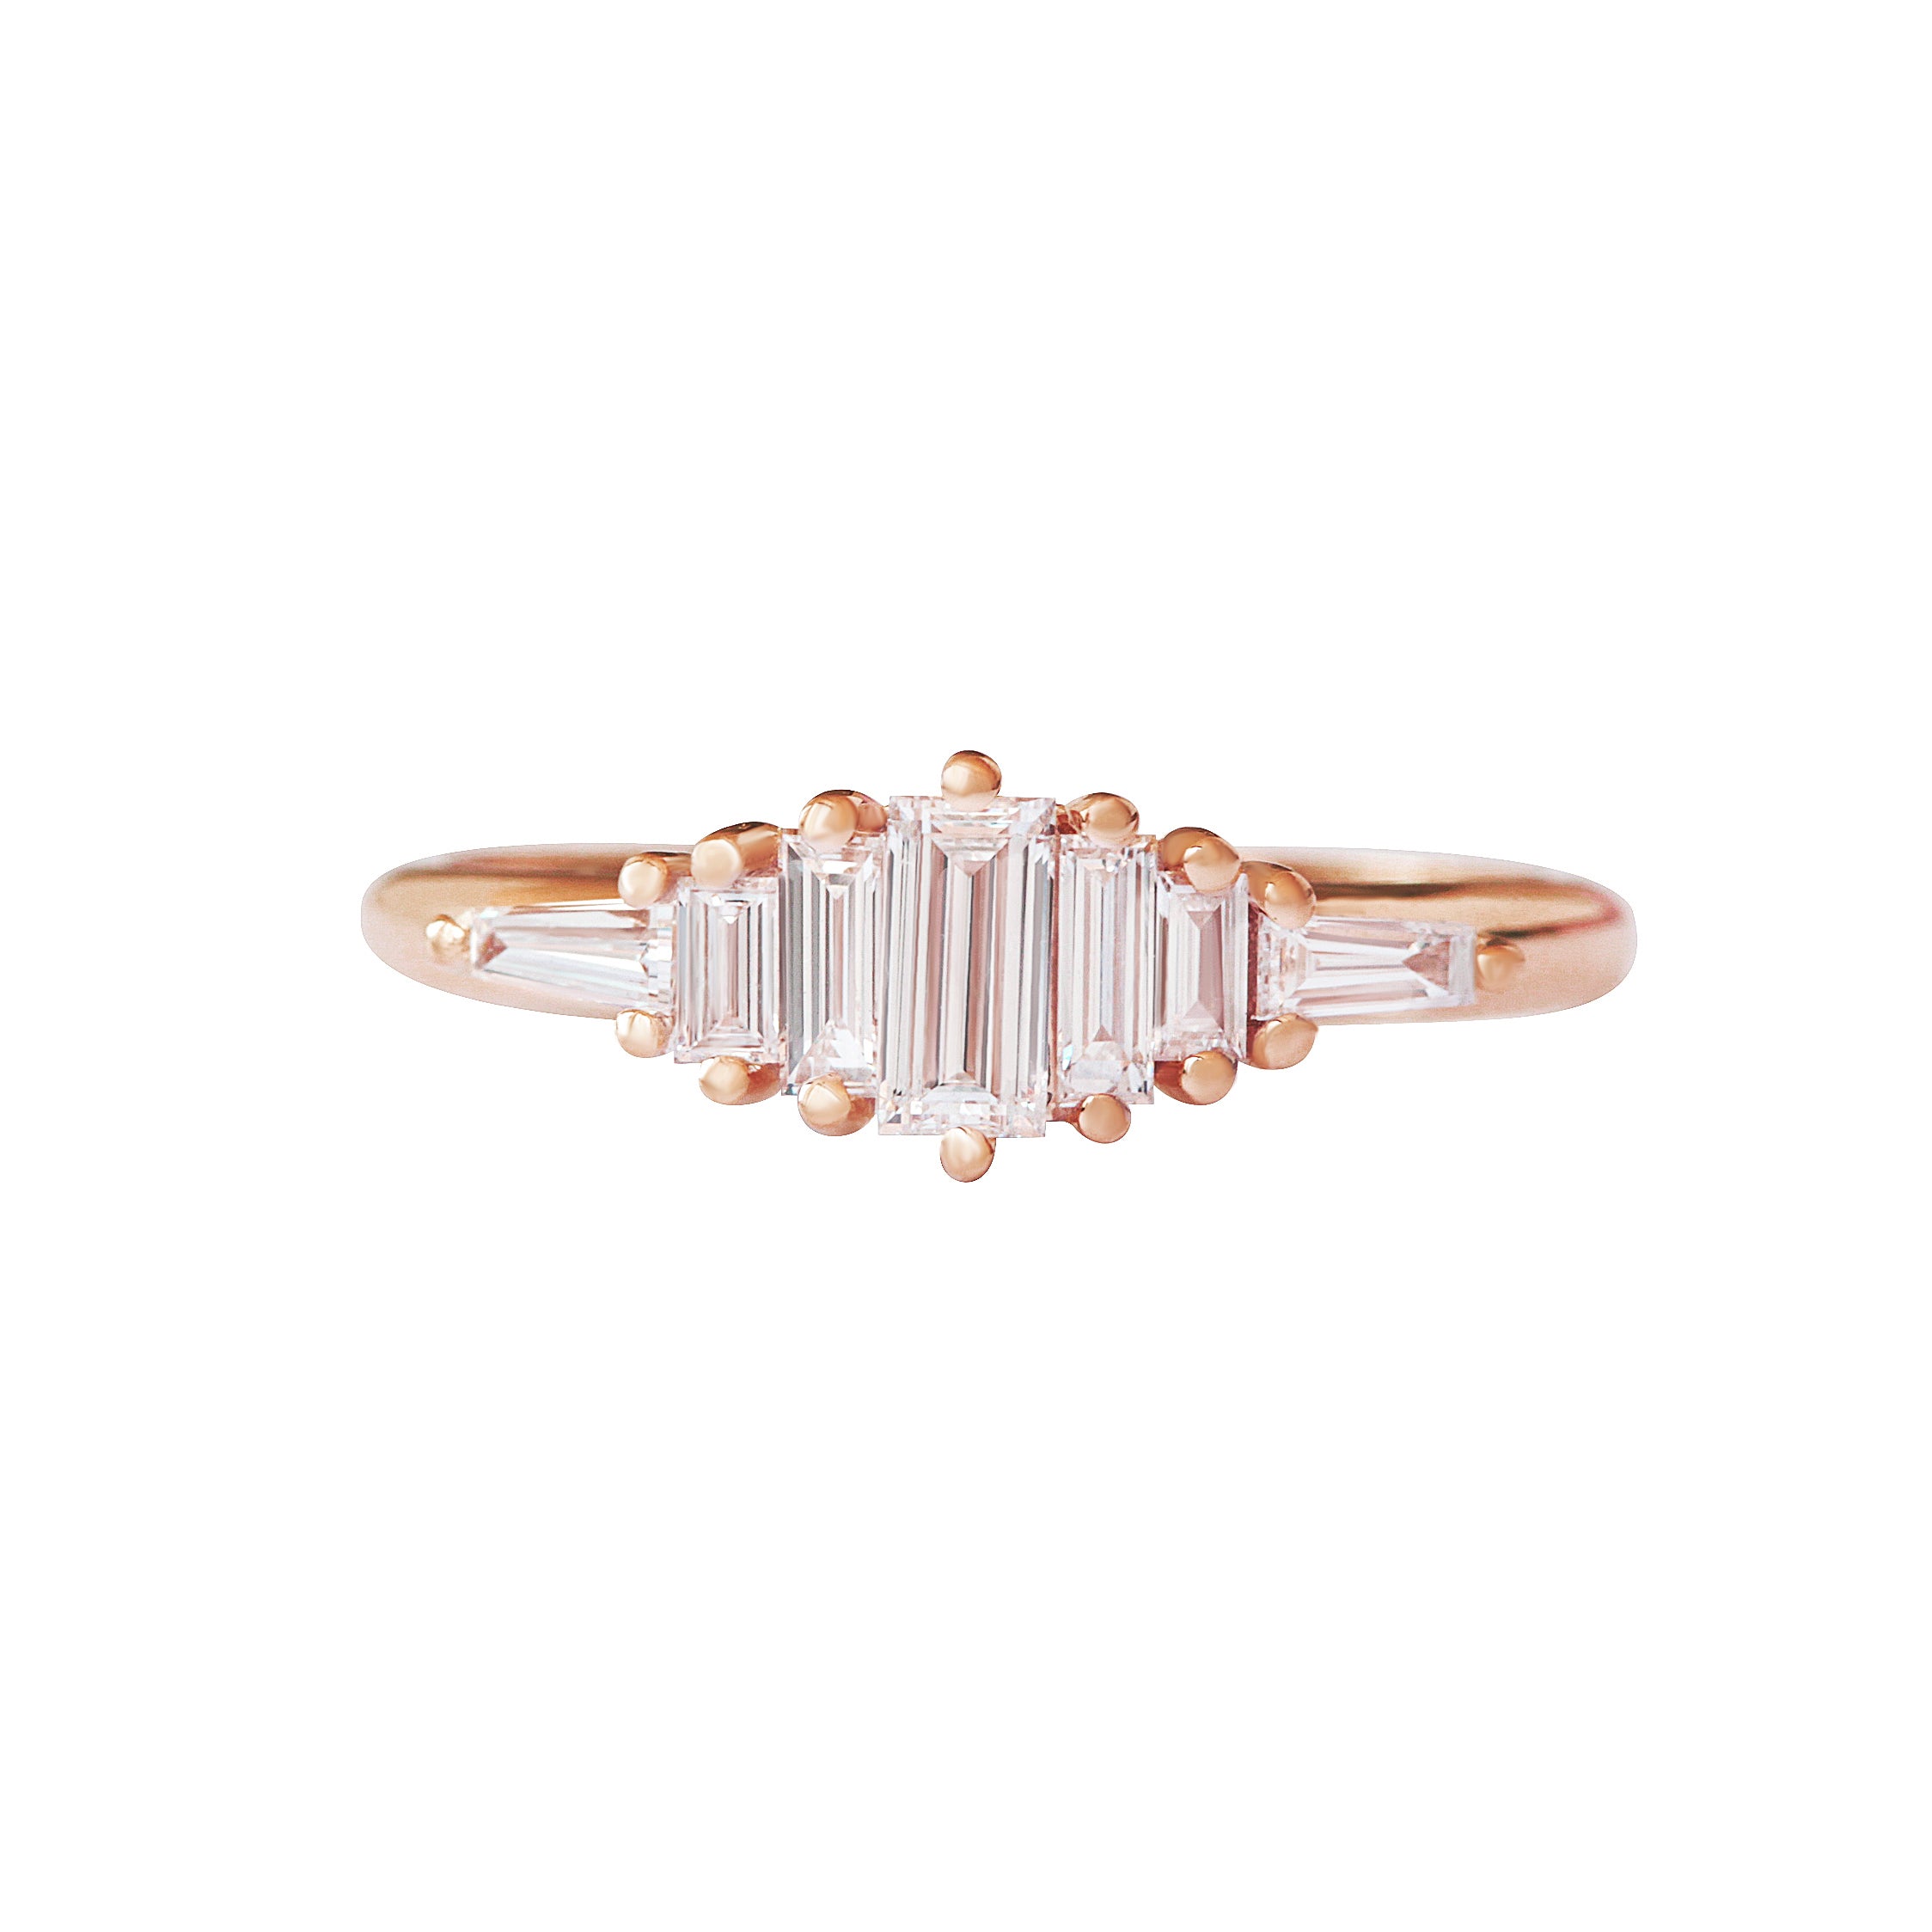 14K rose gold diamond ring with baguette and tapper diamonds